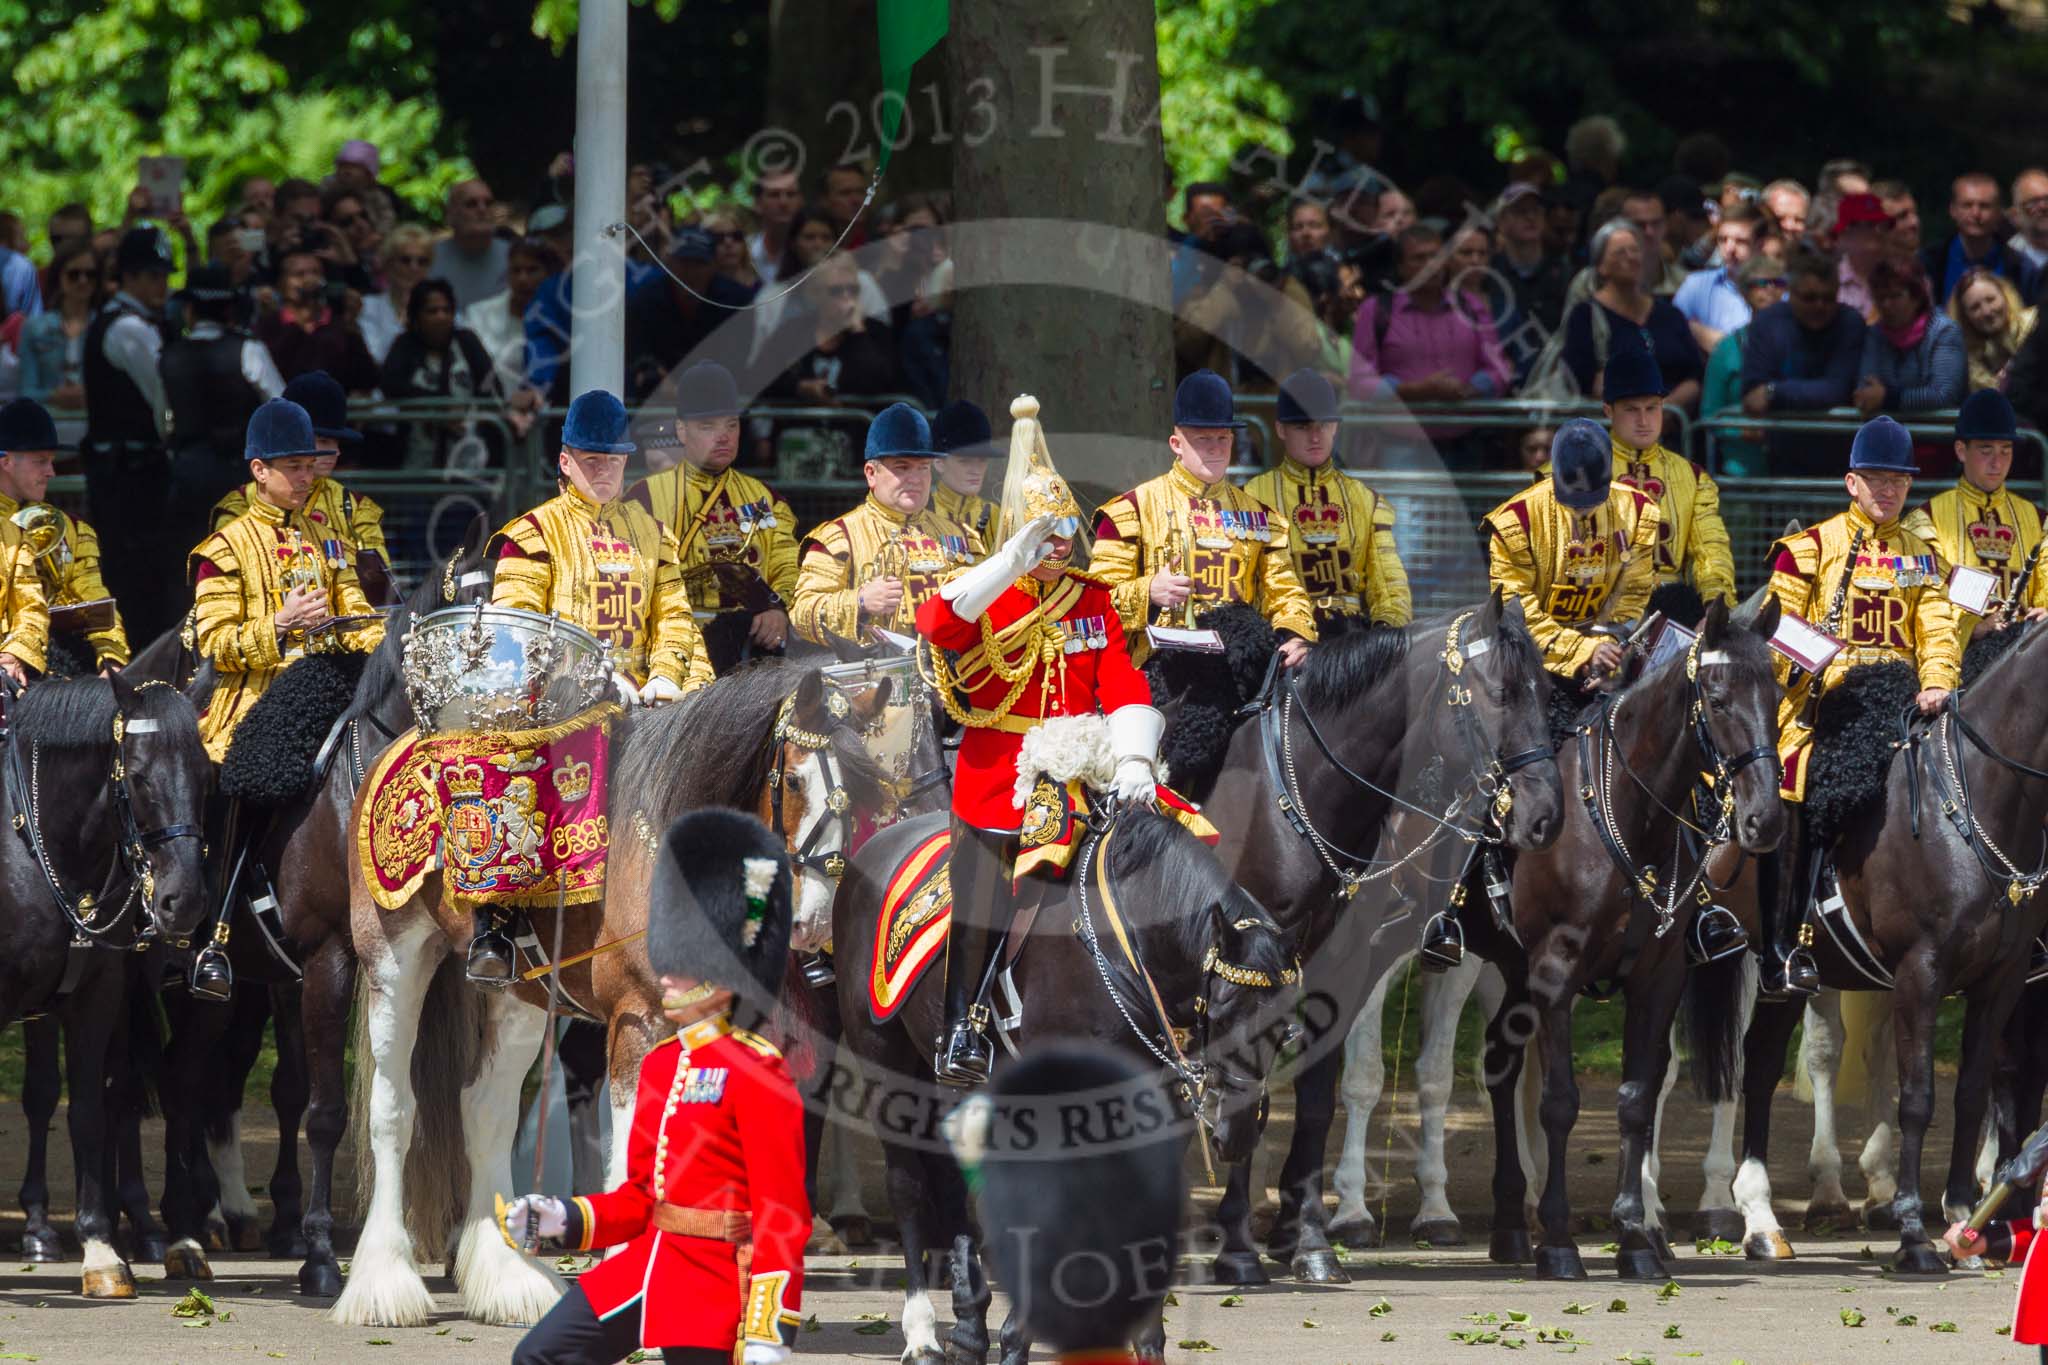 The Colonel's Review 2015.
Horse Guards Parade, Westminster,
London,

United Kingdom,
on 06 June 2015 at 11:39, image #412